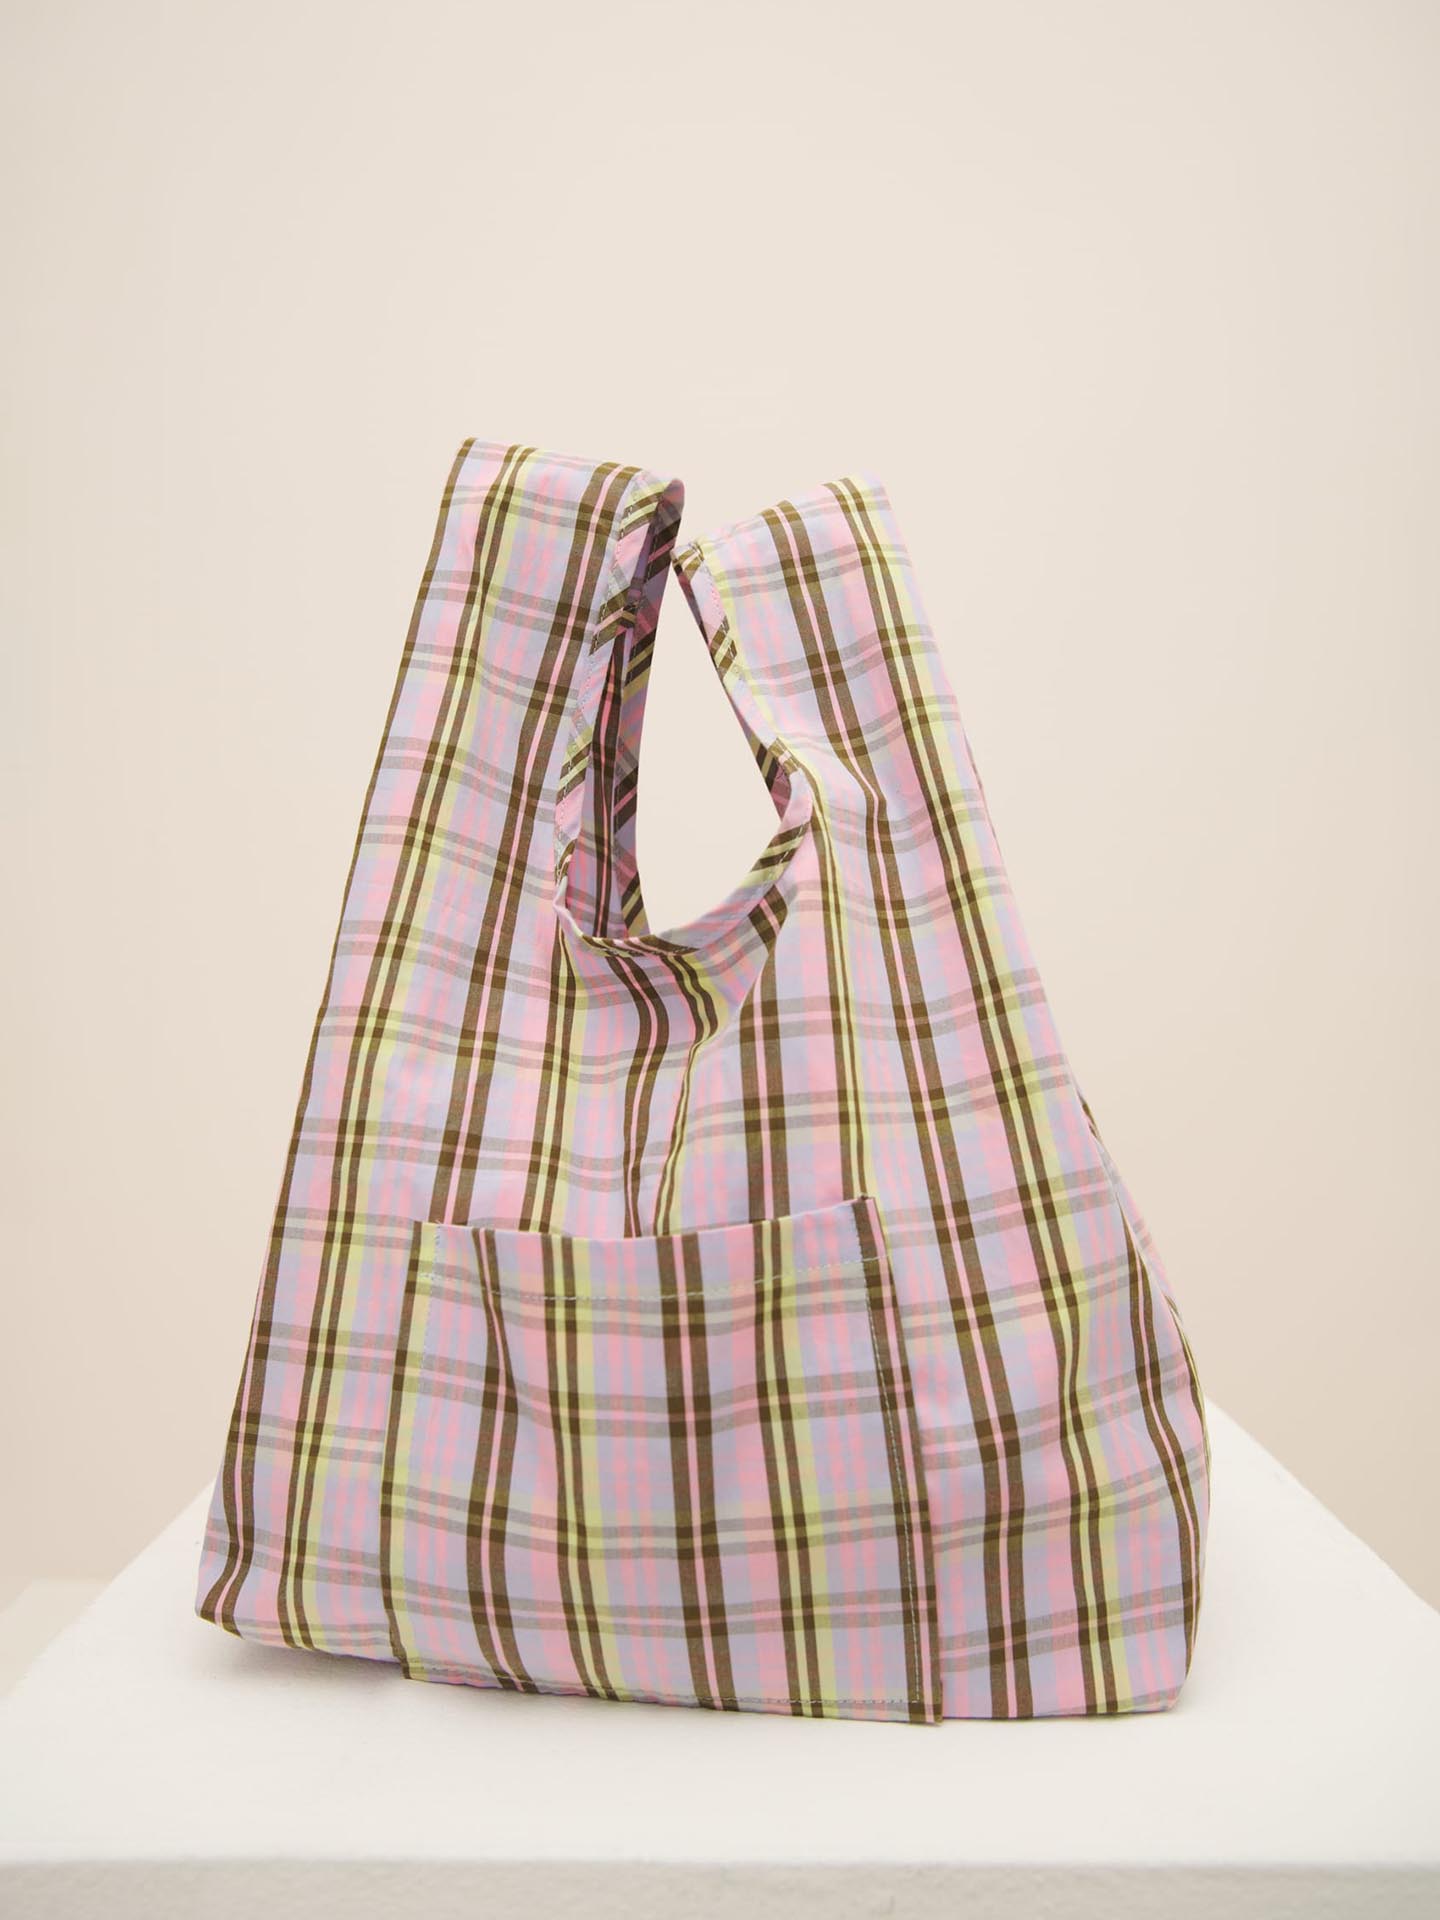 A Mini Market Bag – Pink Tartan from Kowtow displayed against a neutral background.